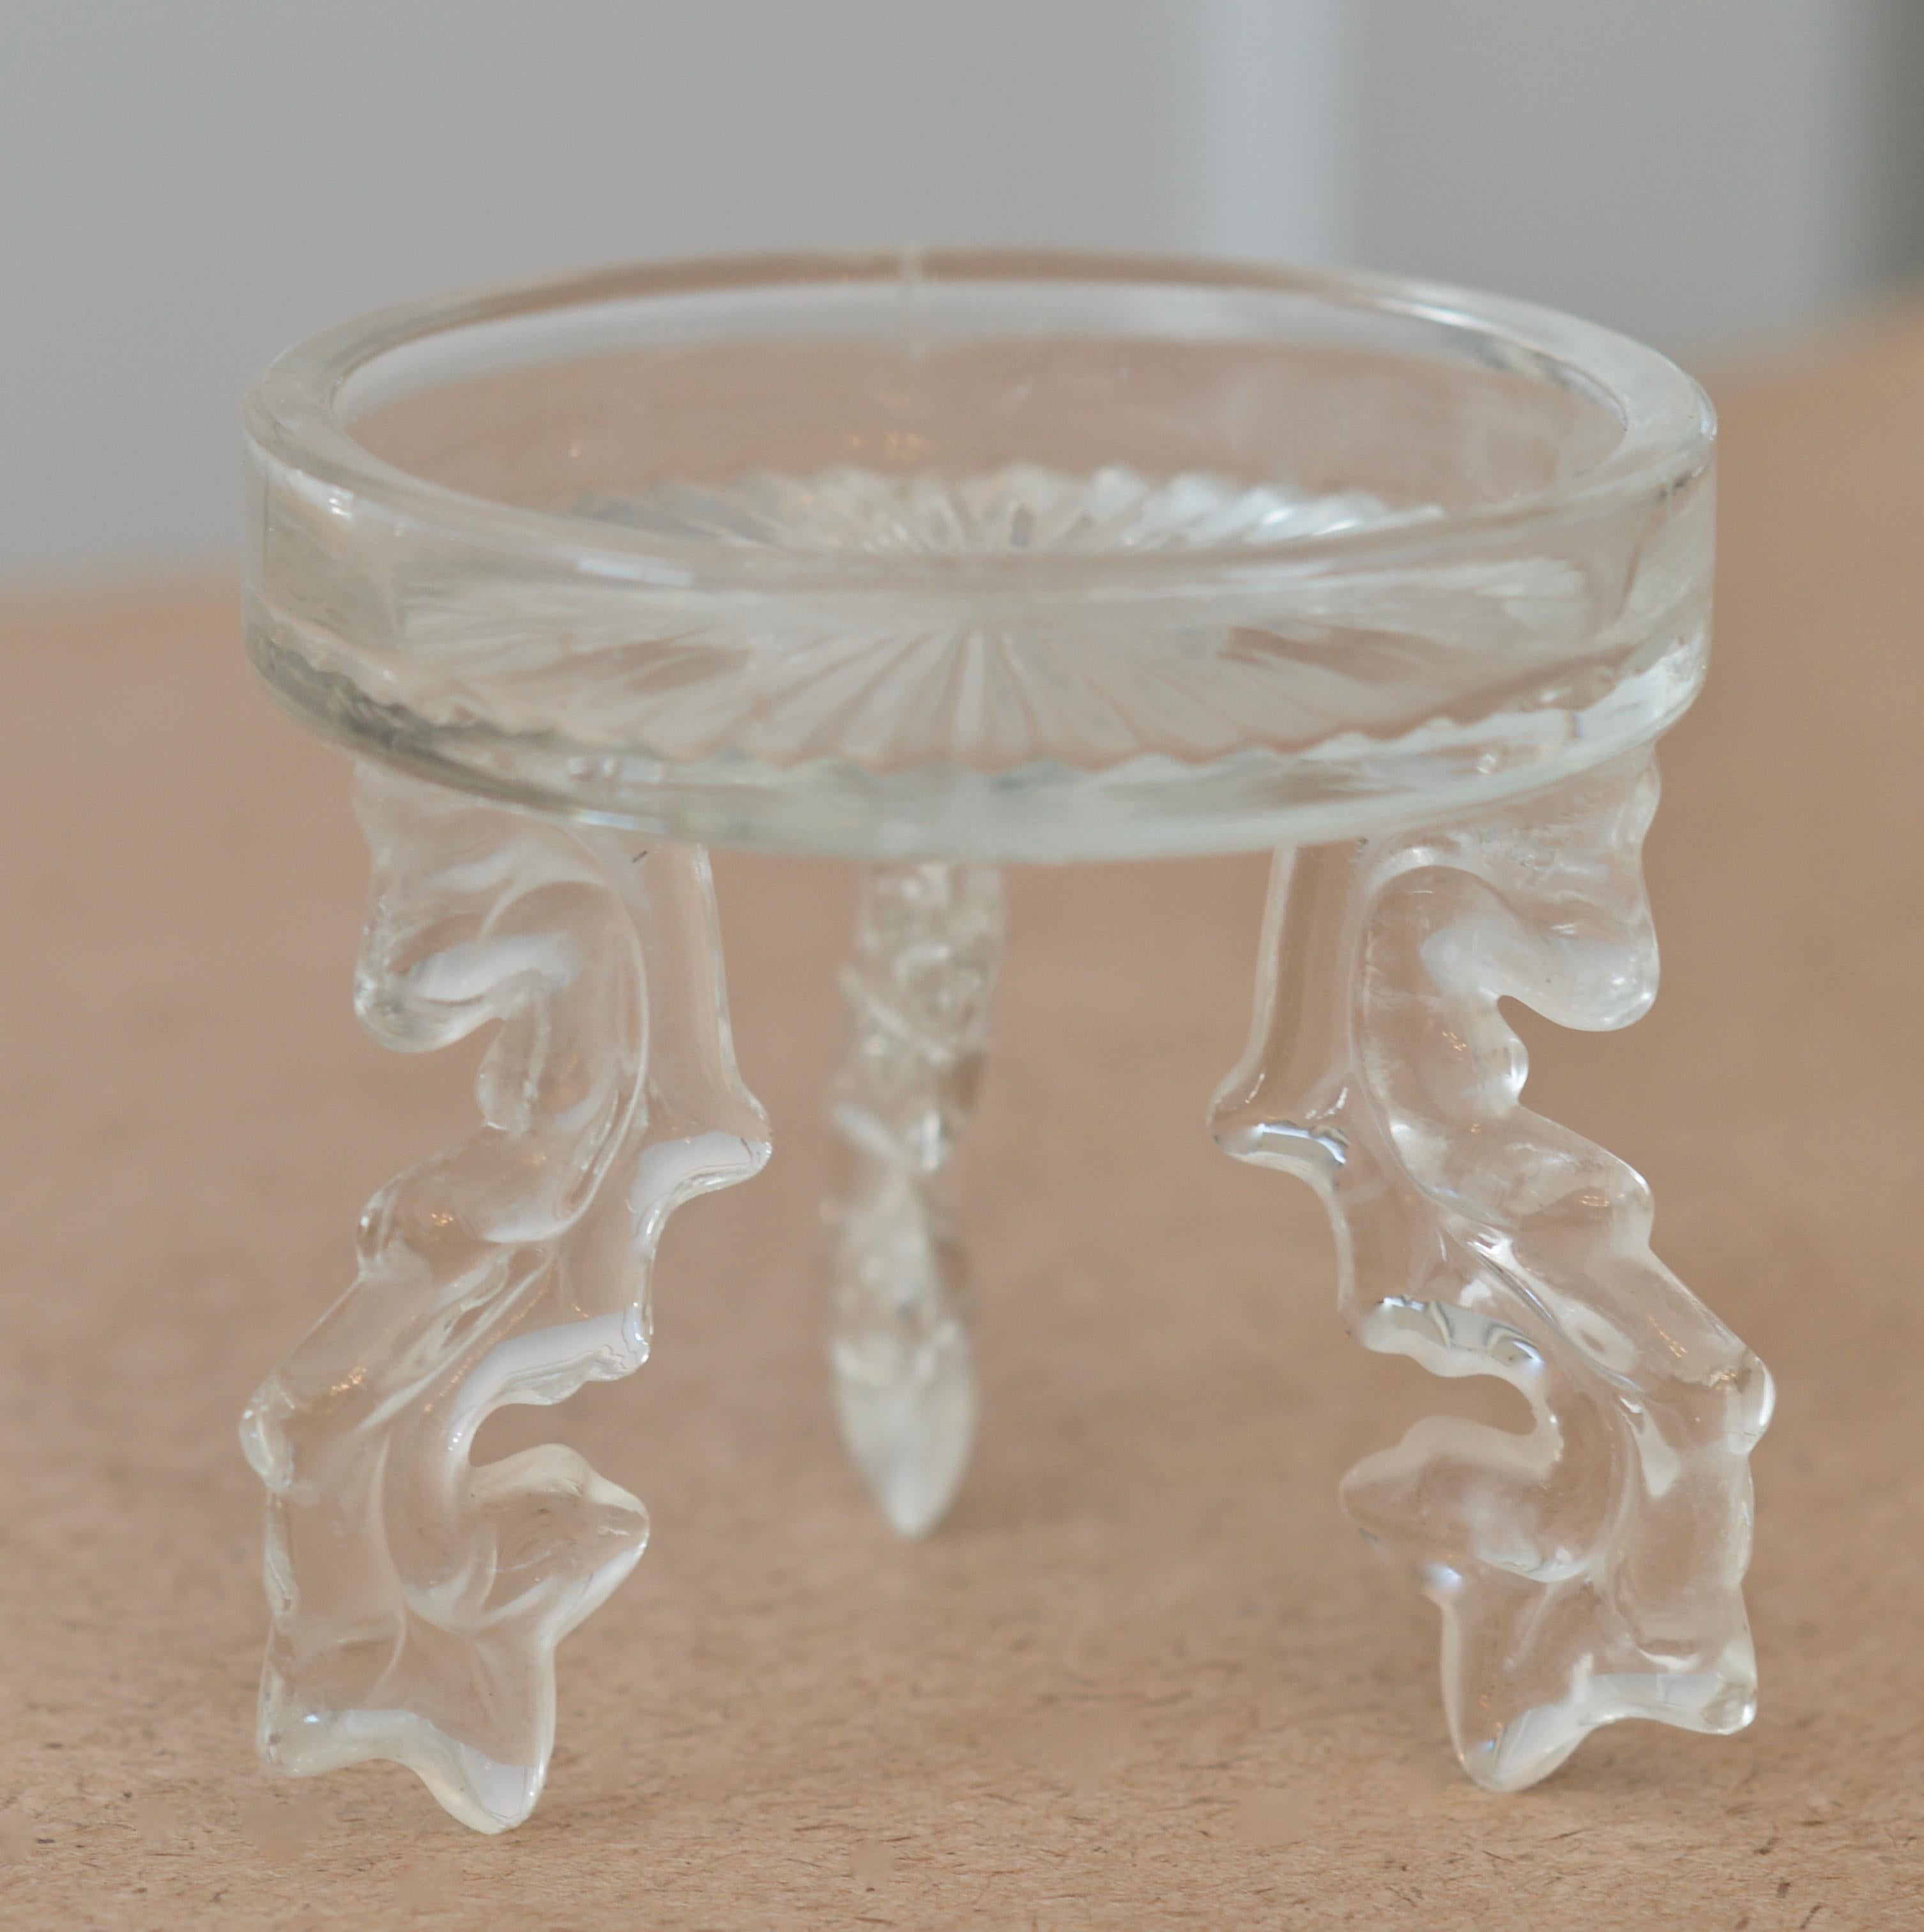 American 1980s Chinoiserie Pedestal Glass Pillar Asian Candle Holders - a Pair For Sale